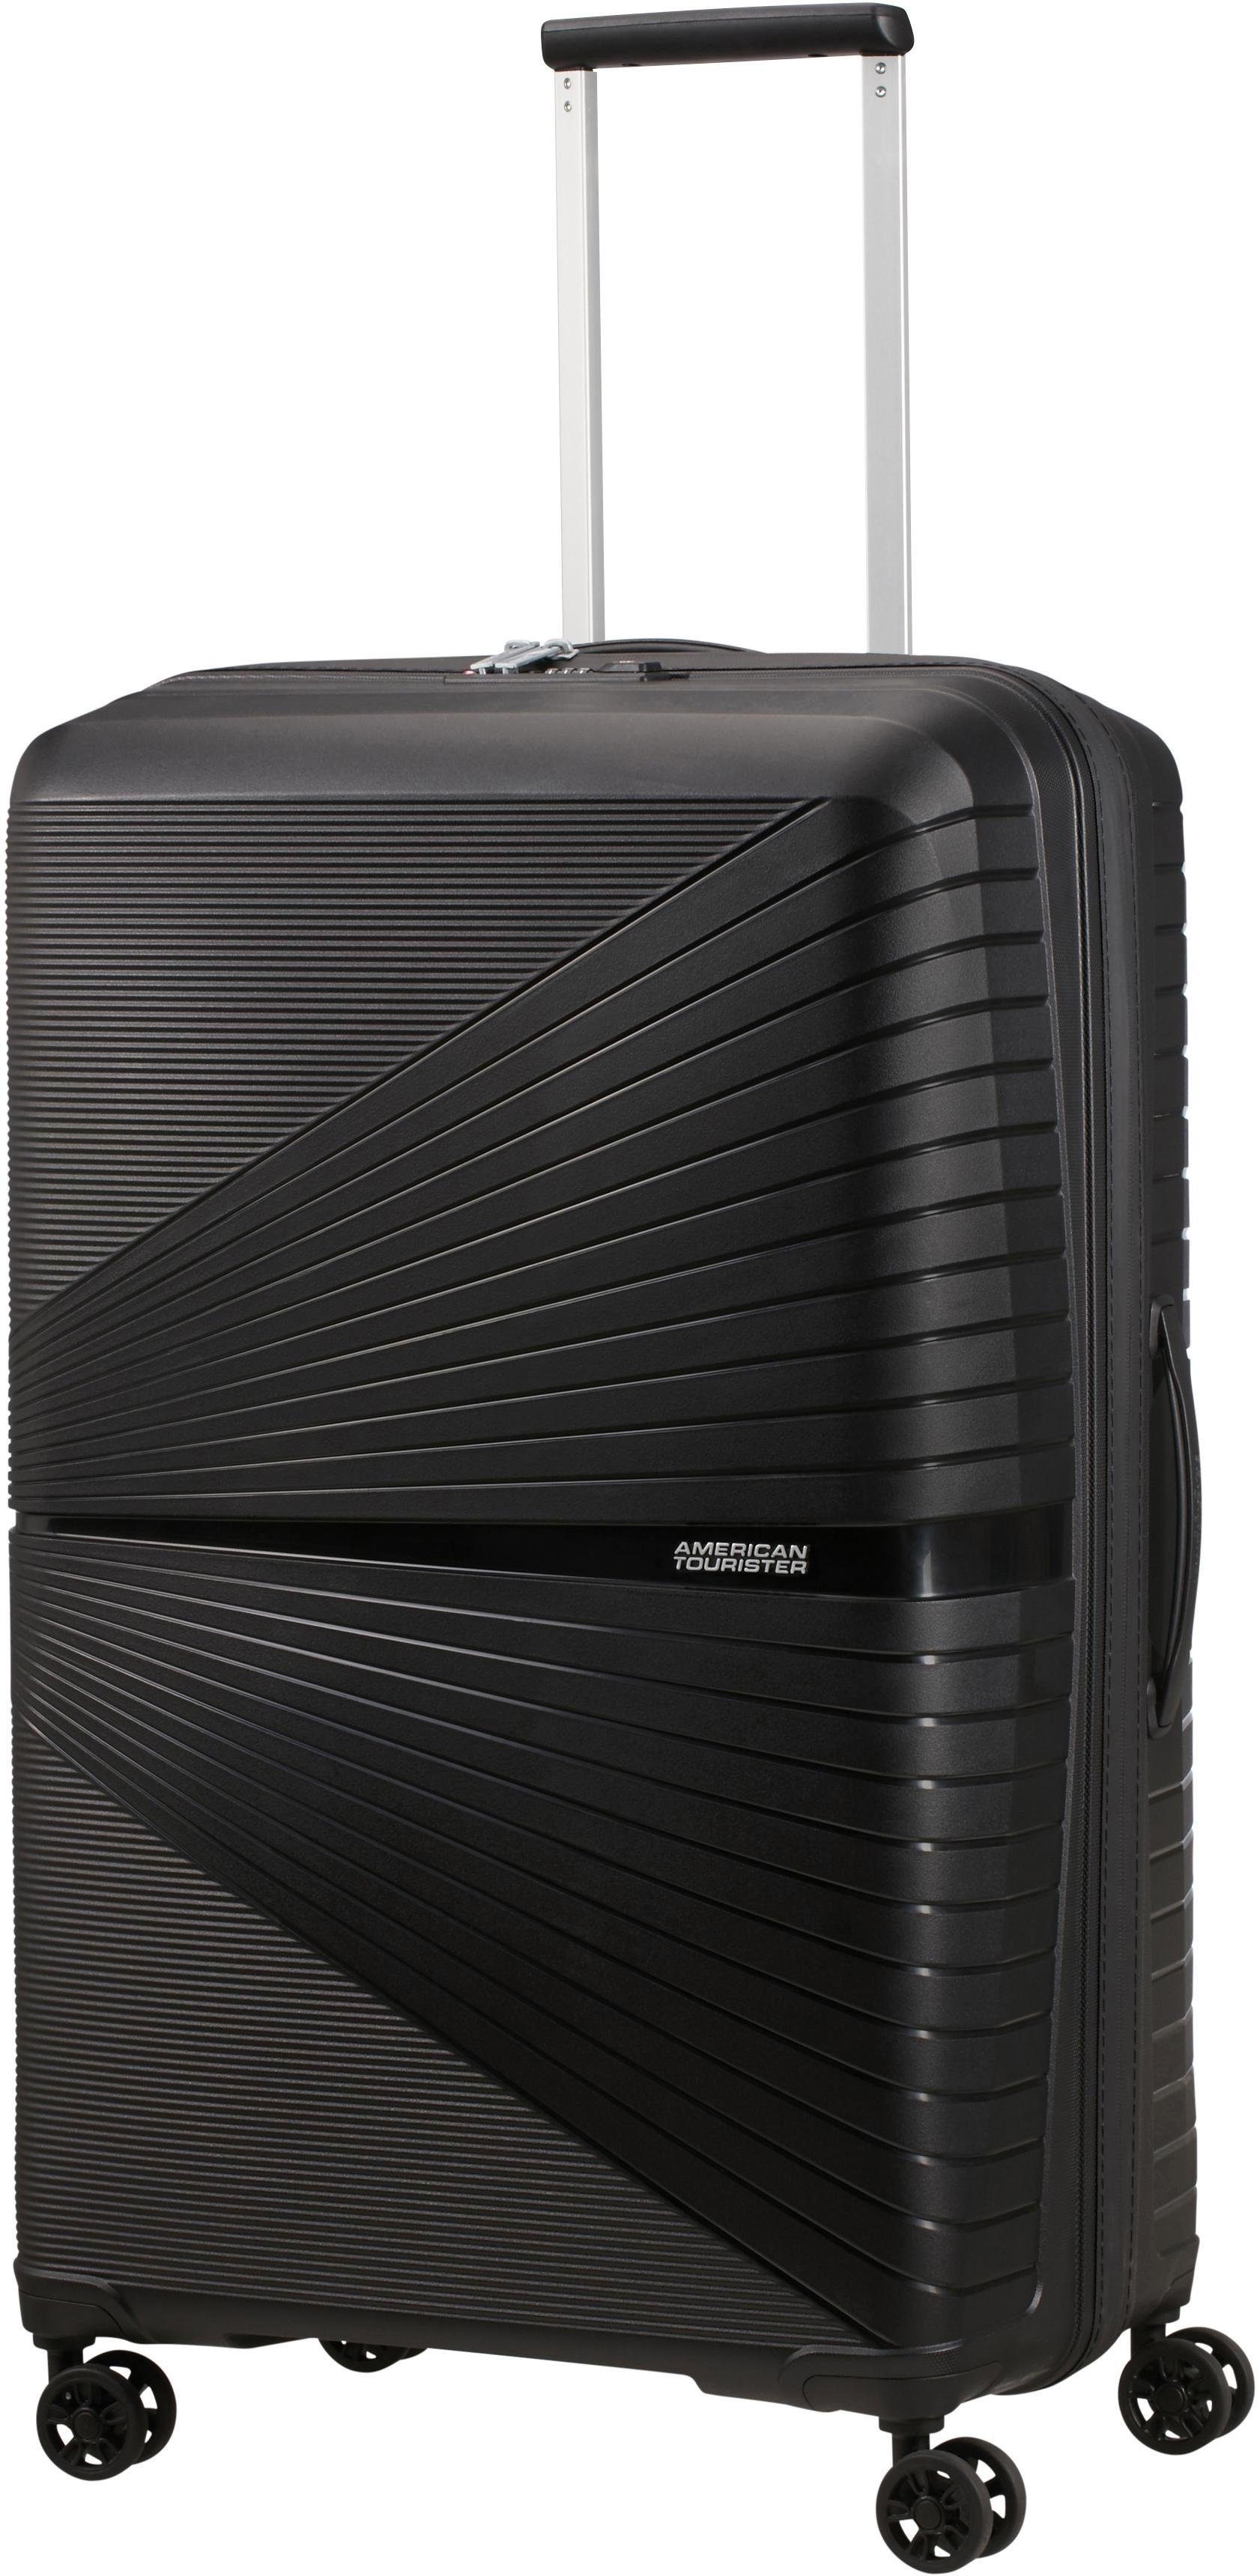 4 American Spinner Onyx Rollen 77, Black Tourister® AIRCONIC Koffer